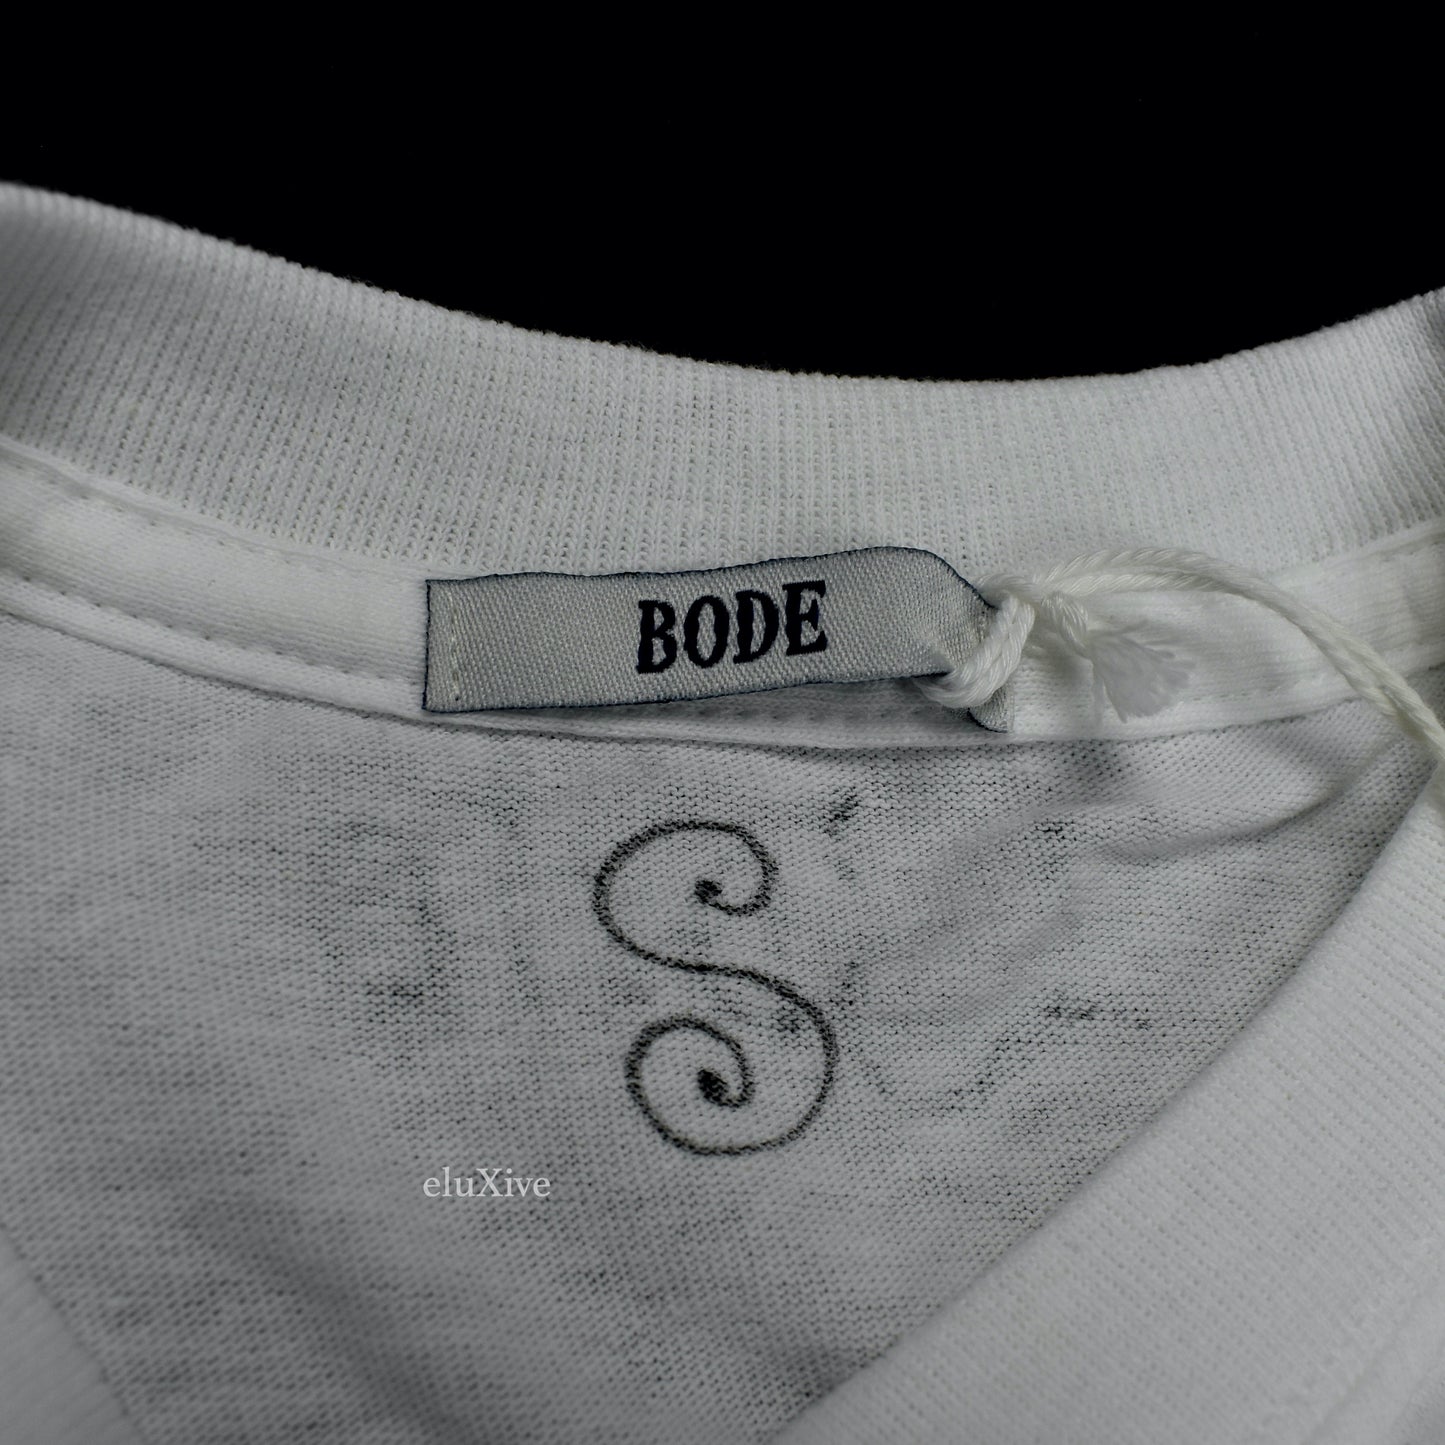 Bode - Hand Illustrated Cow Logo T-Shirt (White)